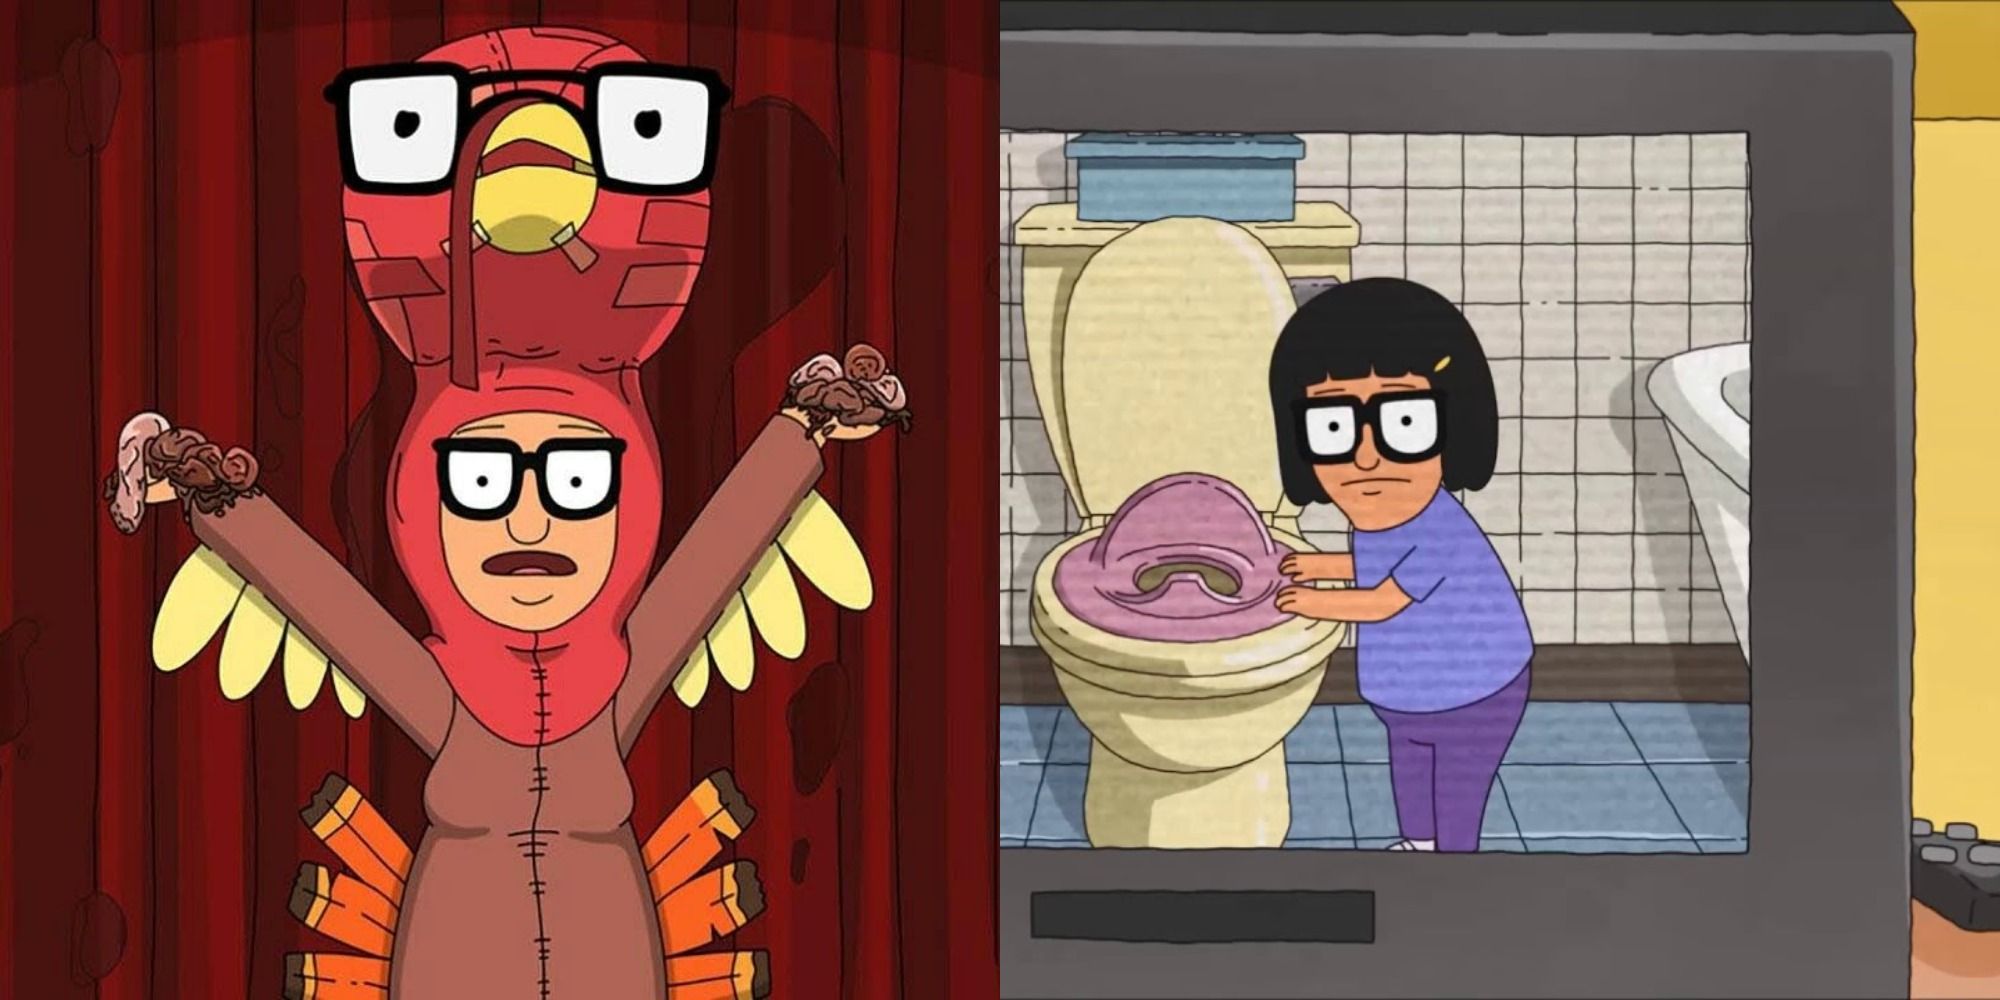 An image of Tina in a turkey outfit and Tina singing to the toilet in Bob's Burgers